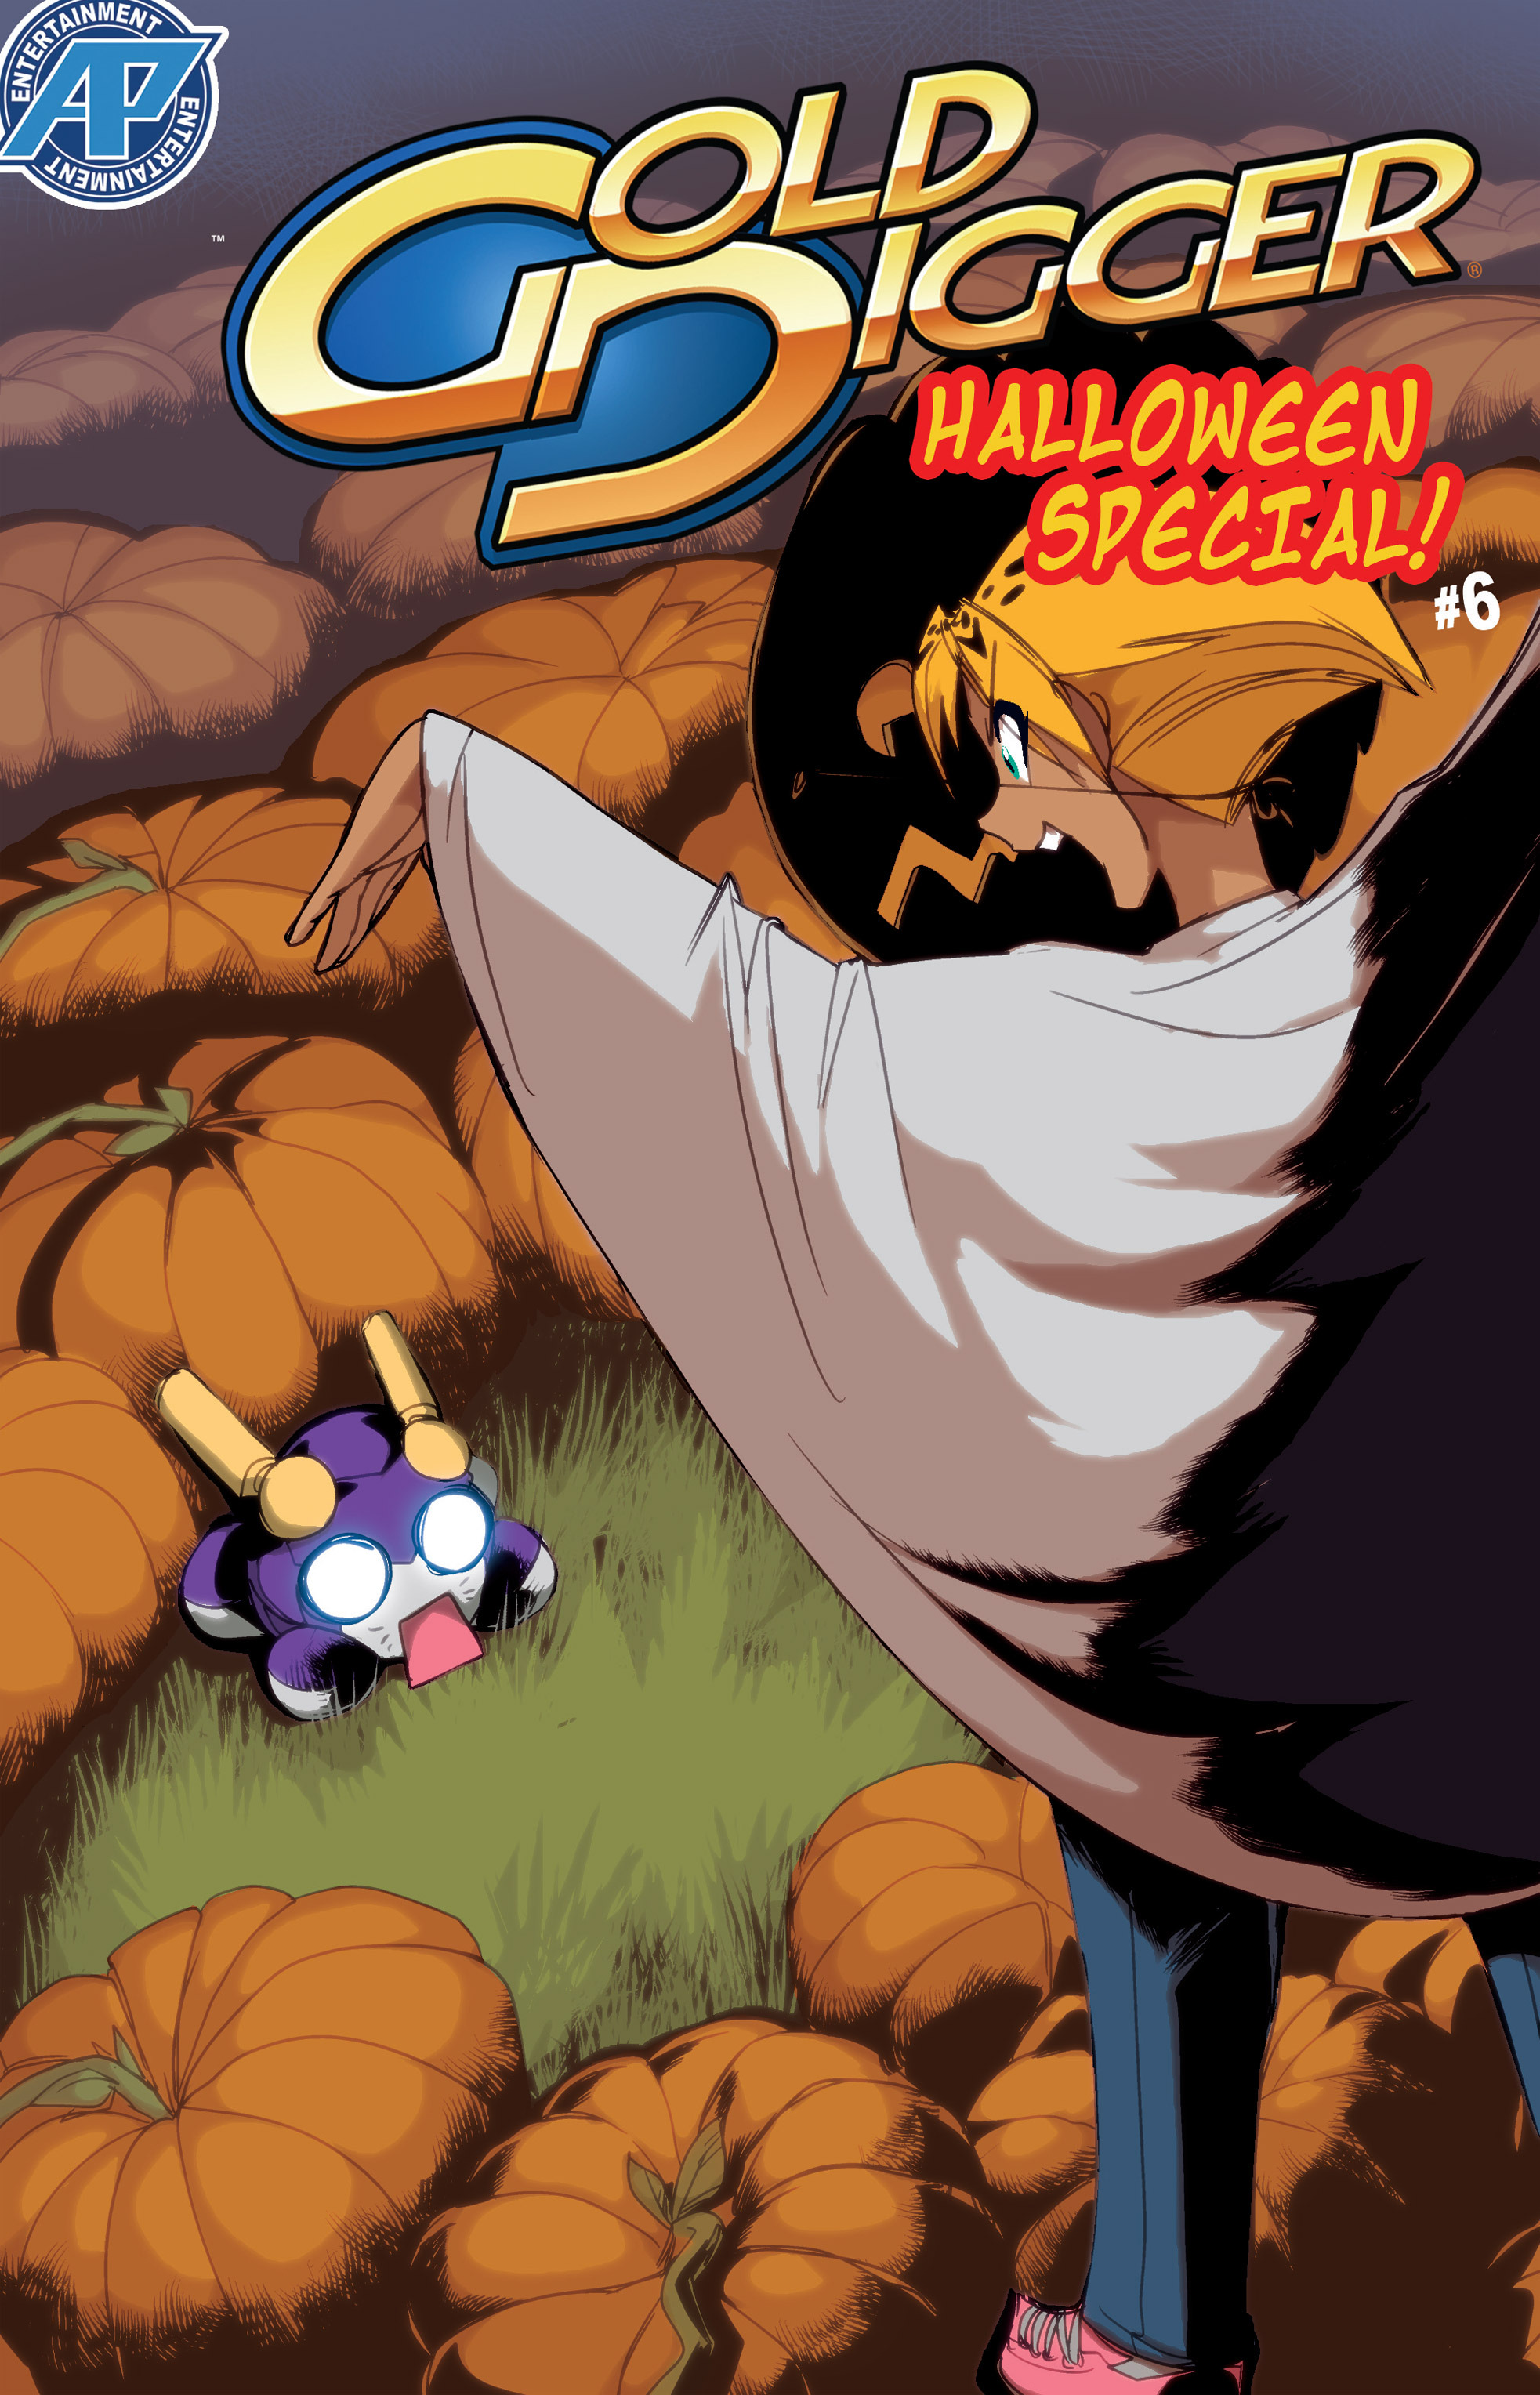 Read online Gold Digger Halloween Special comic -  Issue #6 - 1